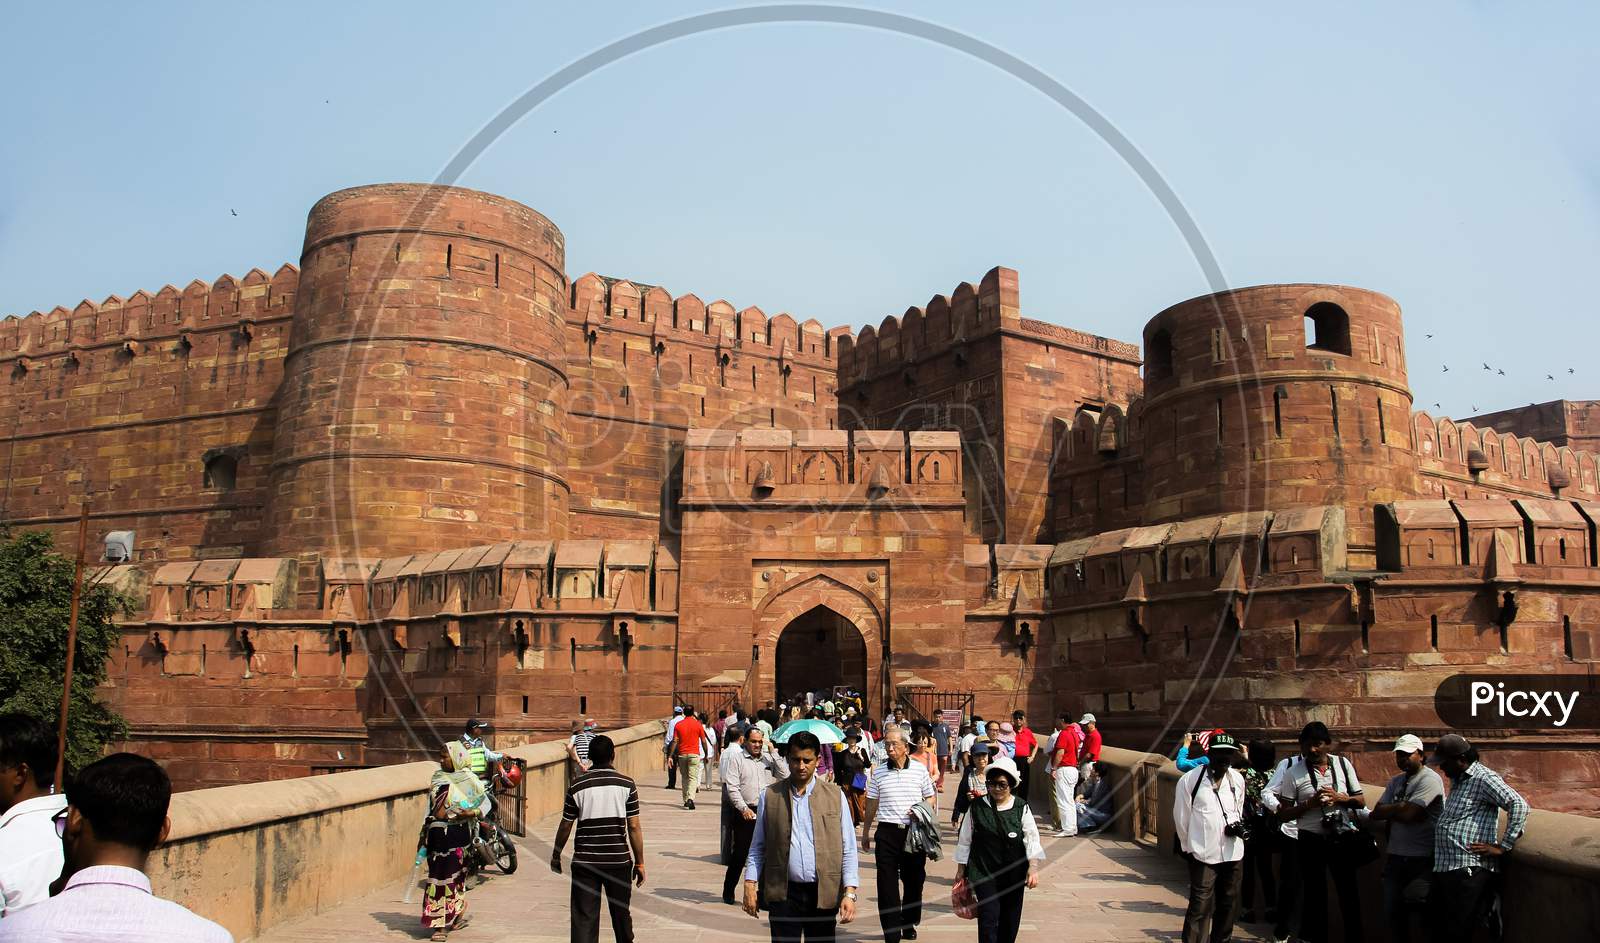 Historic red sandstone fort of medieval India at sunrise. Agra Fort is a UNESCO World Heritage site in the city of Agra India.